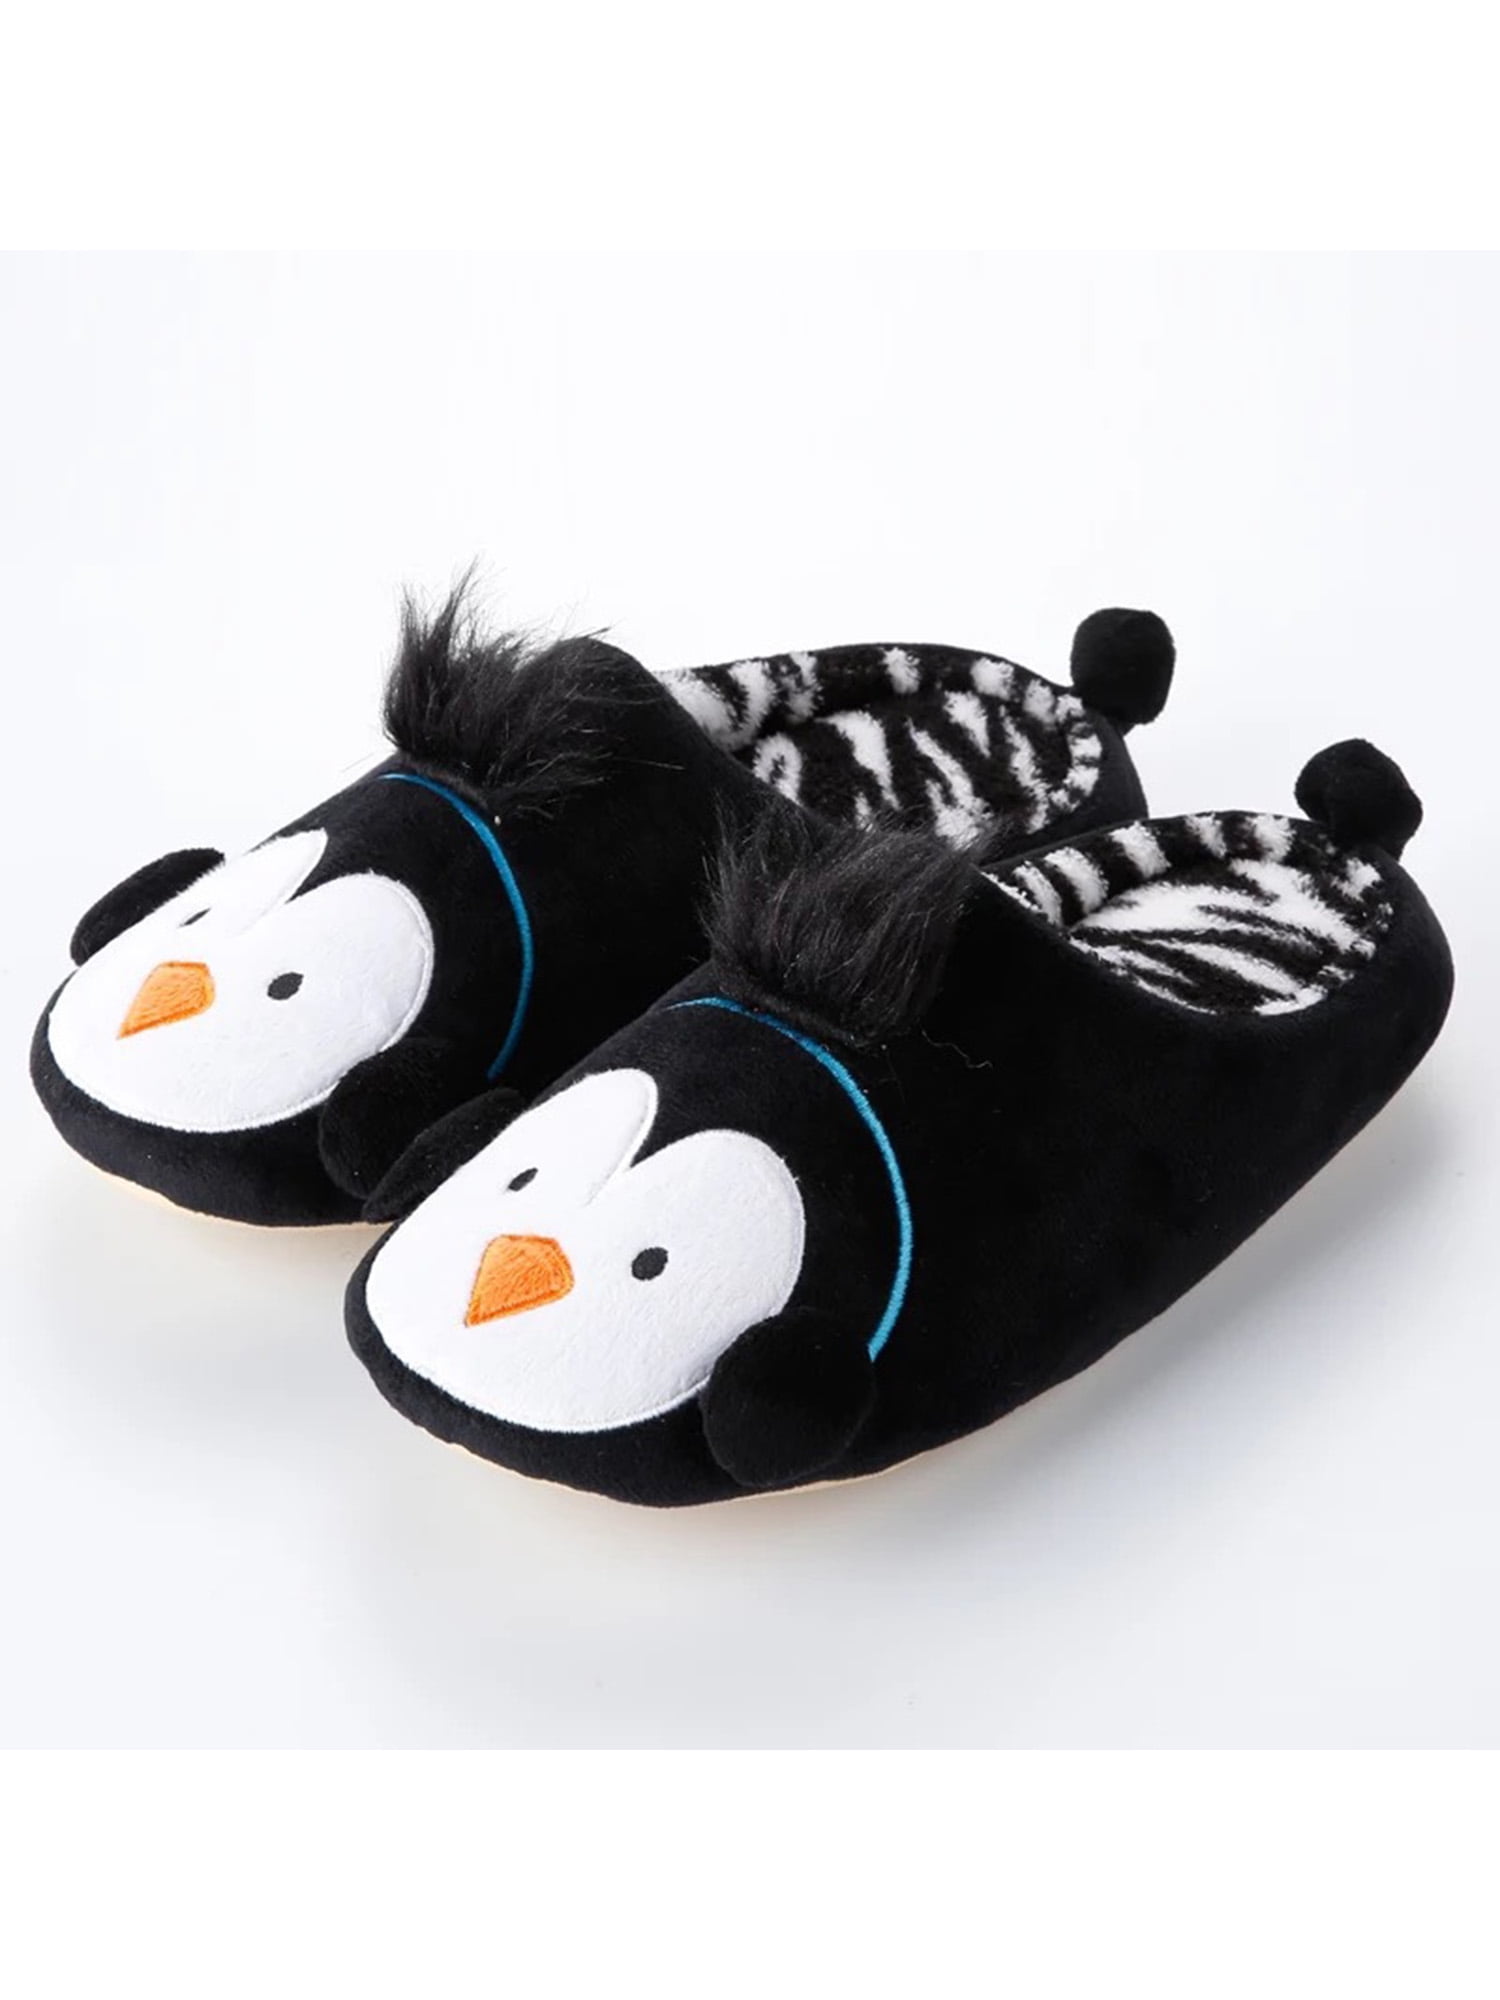 Fun fur animal slipper boot shoe SELECTION fit fashion doll feet up to 2.75cm 